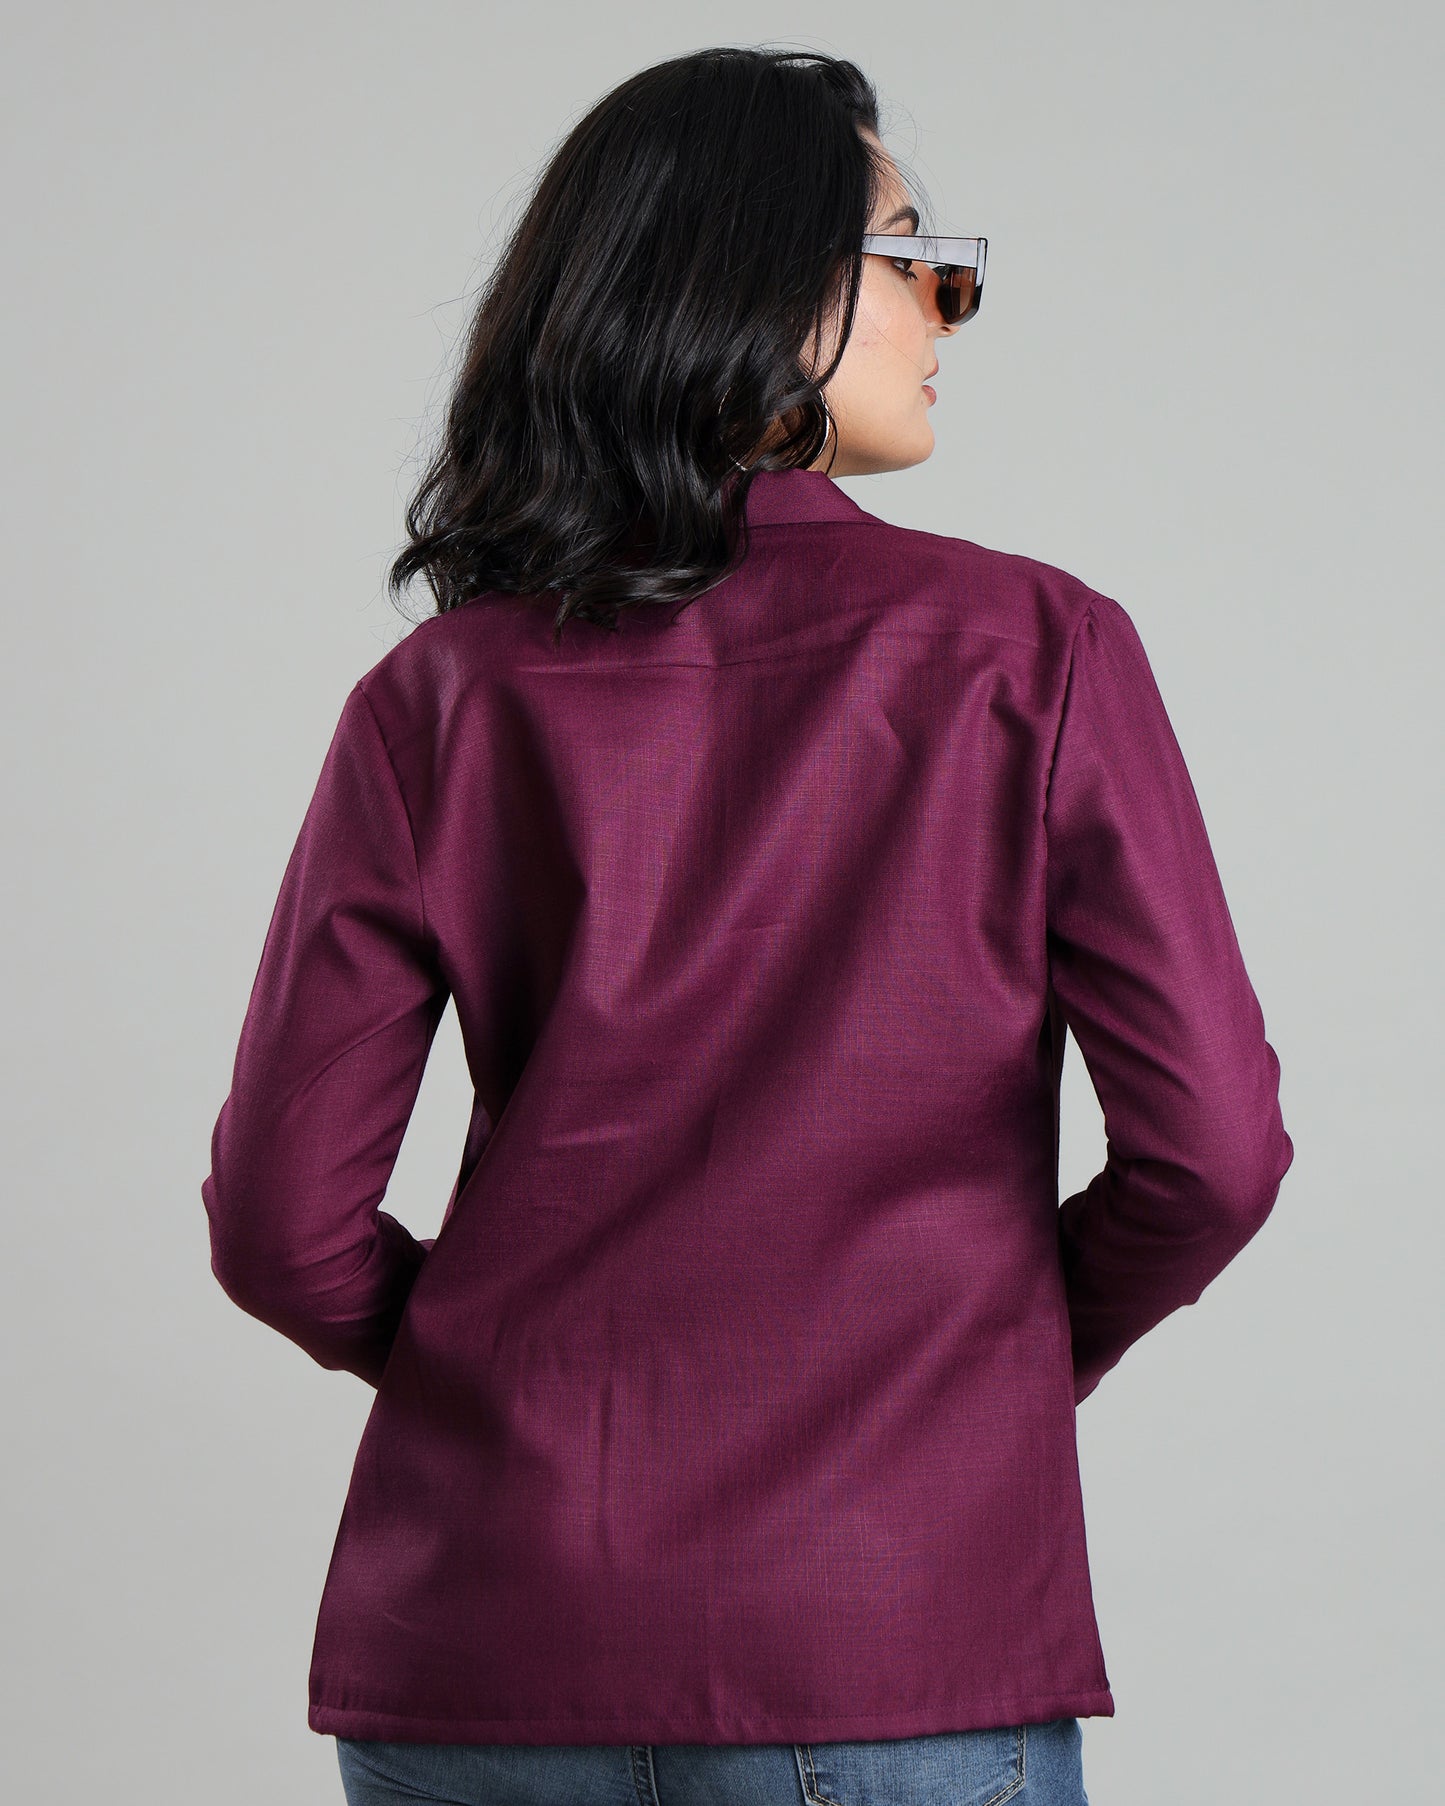 Everyday Ease: Women's Casual Jacket